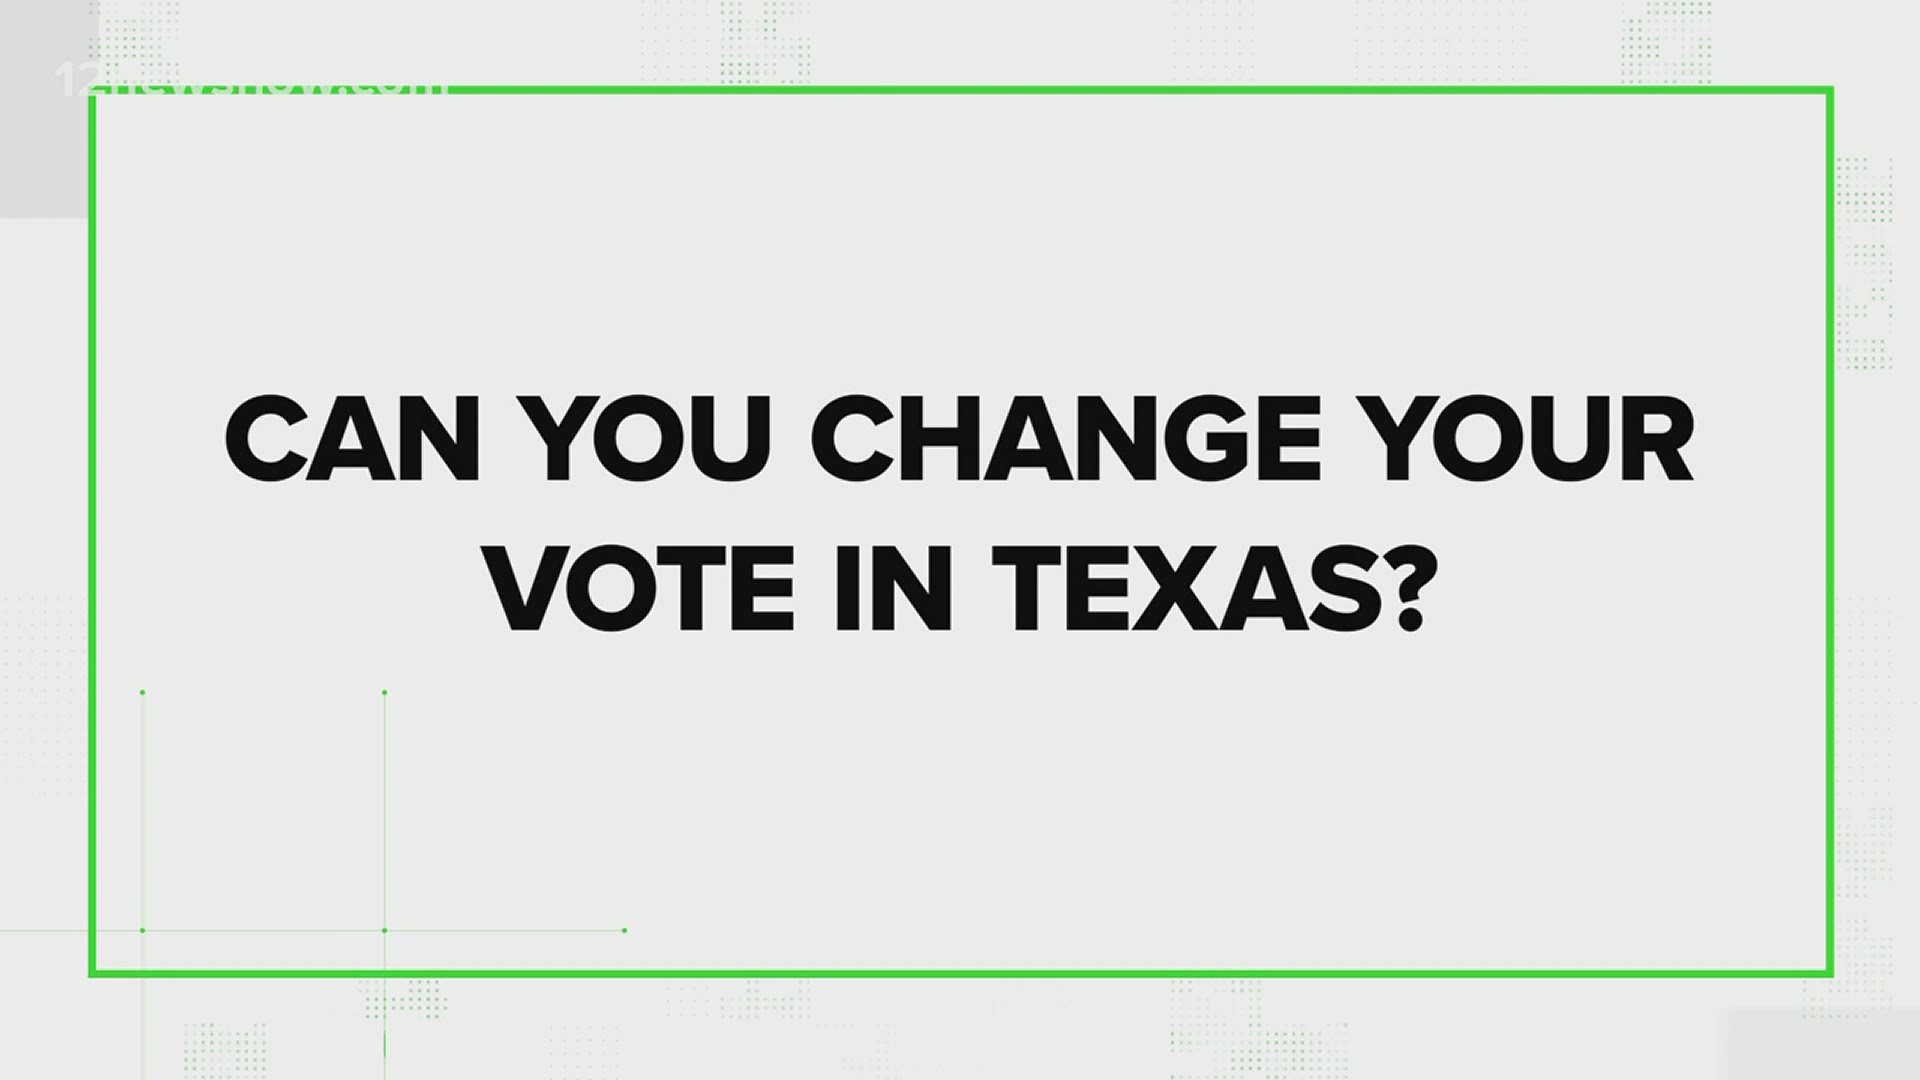 No, a voter's ballot cannot be changed once the vote has been submitted in Texas.